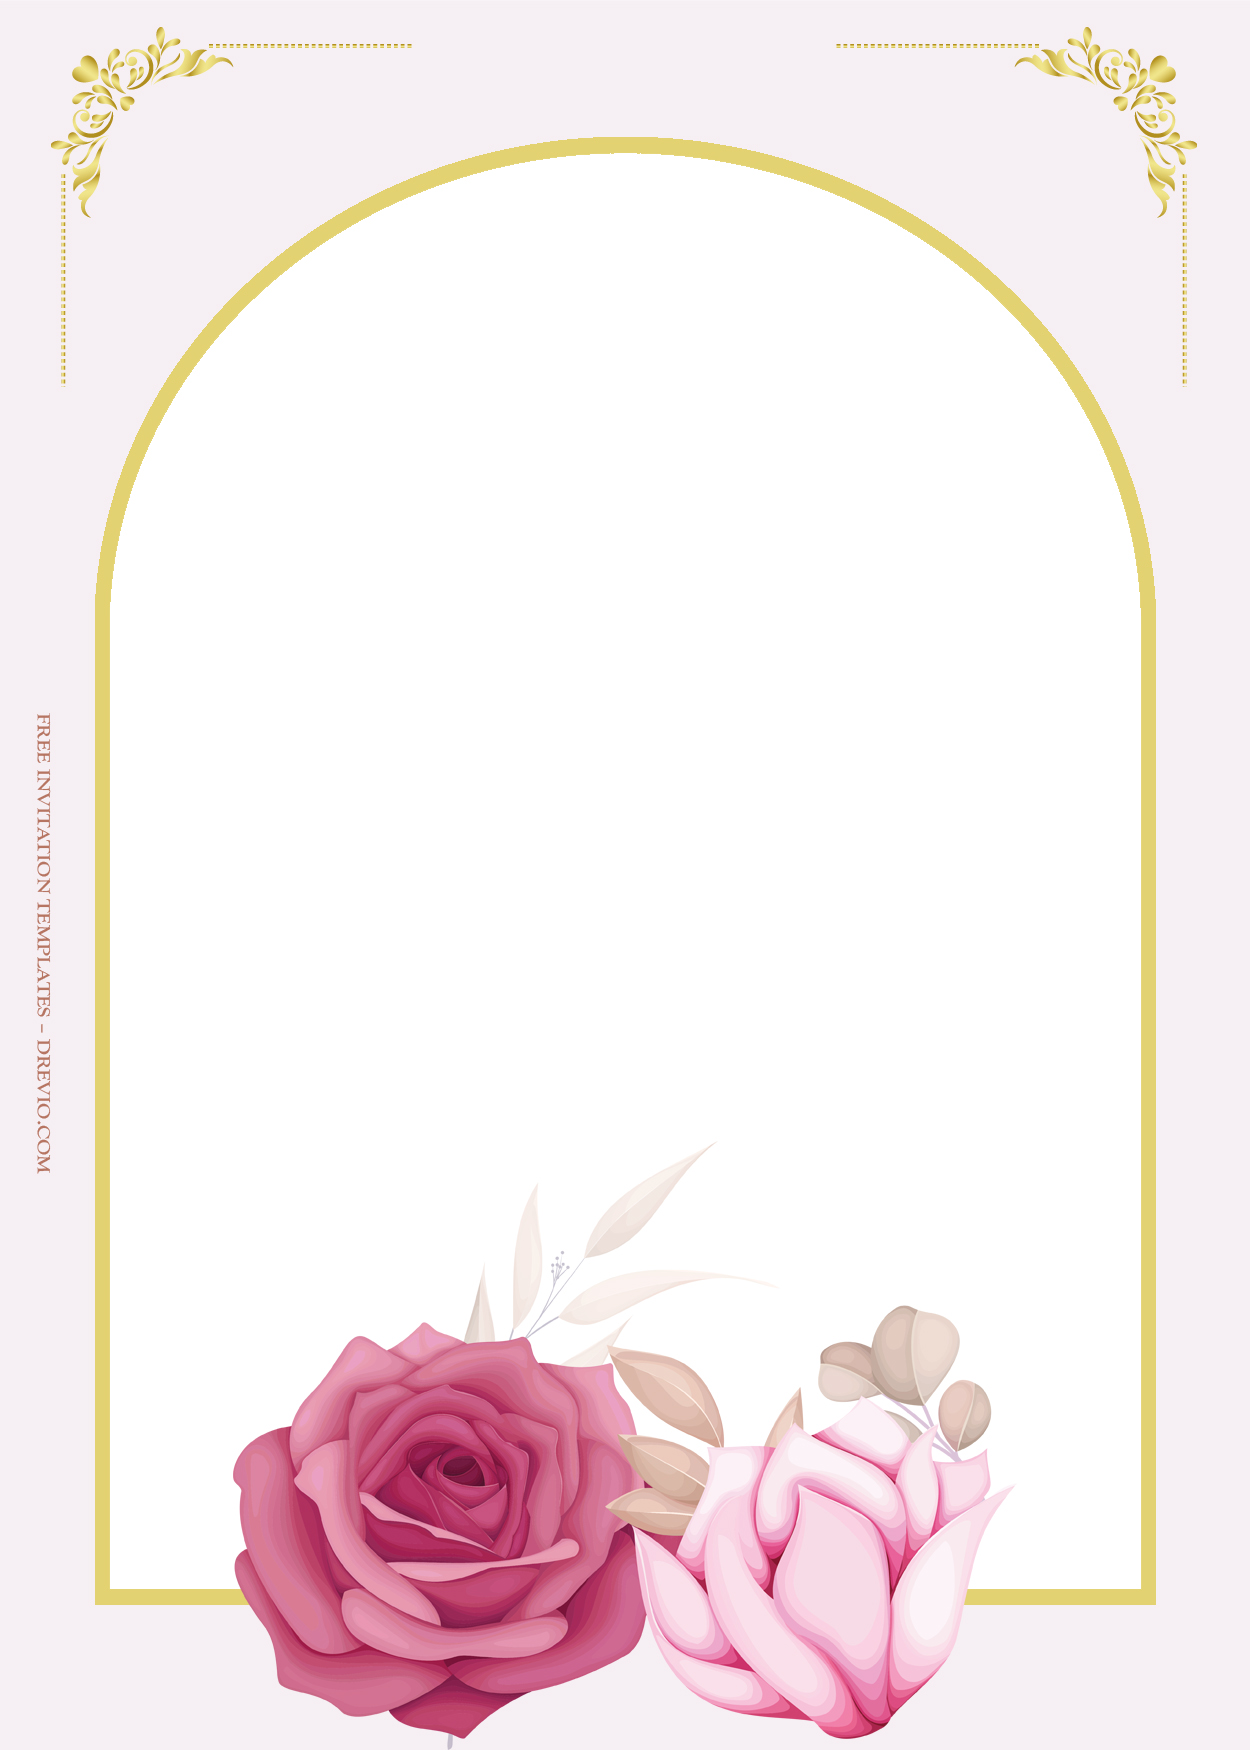 10+ Gate Of Roses Floral Gold Wedding Invitation Templates Six